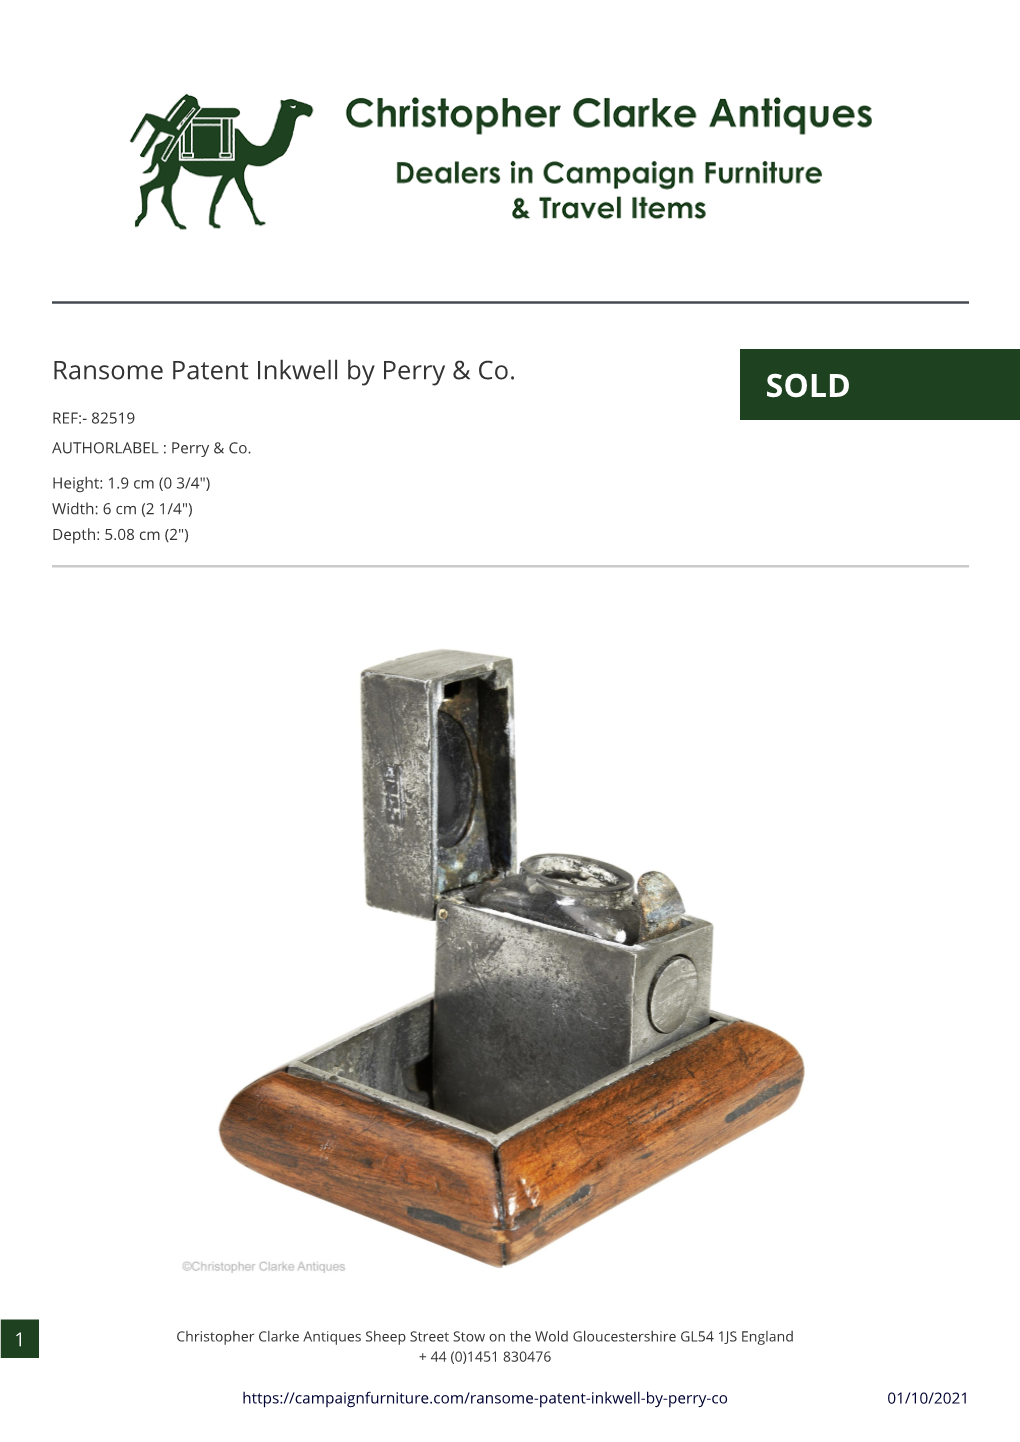 Ransome Patent Inkwell by Perry & Co